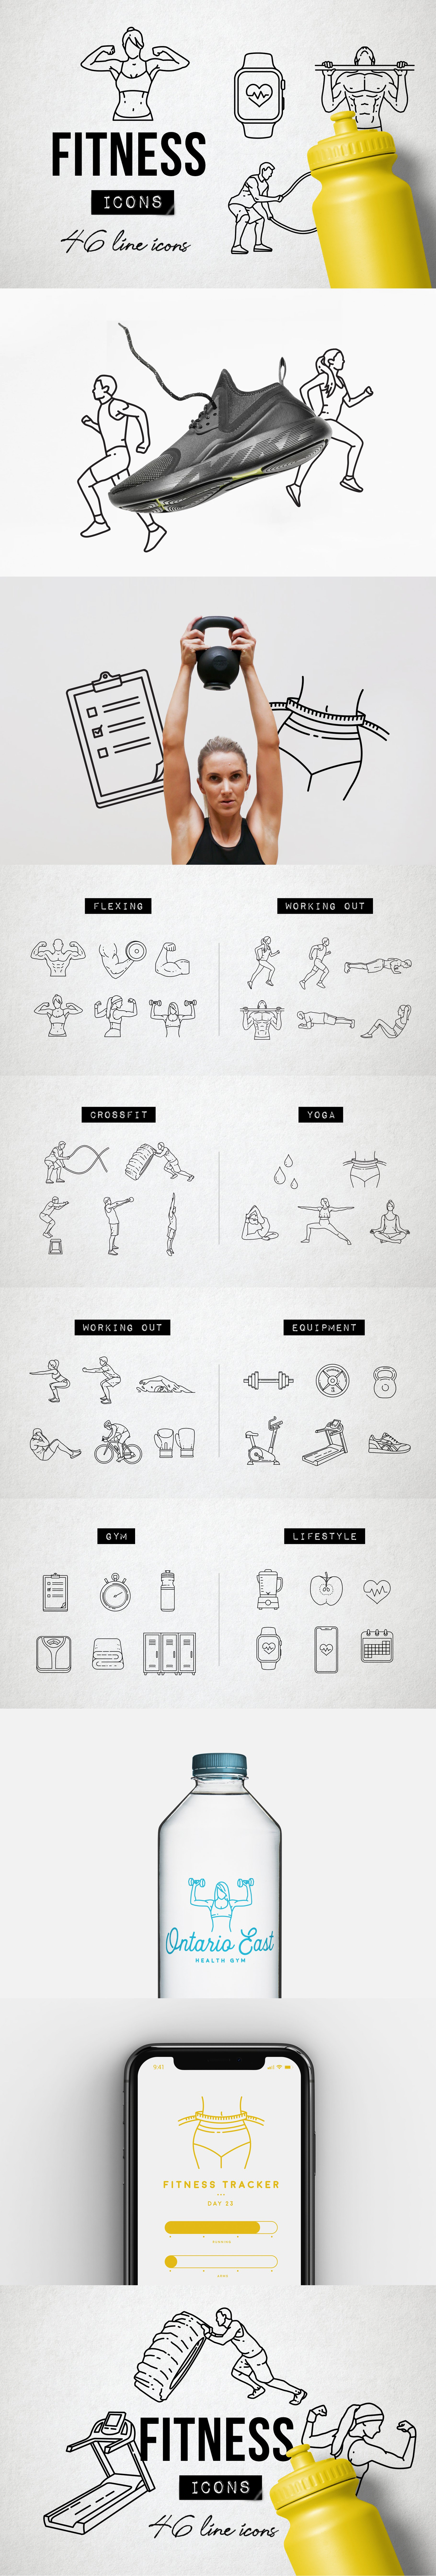 46 Fitness Icons - Exercise, Sports cover image.